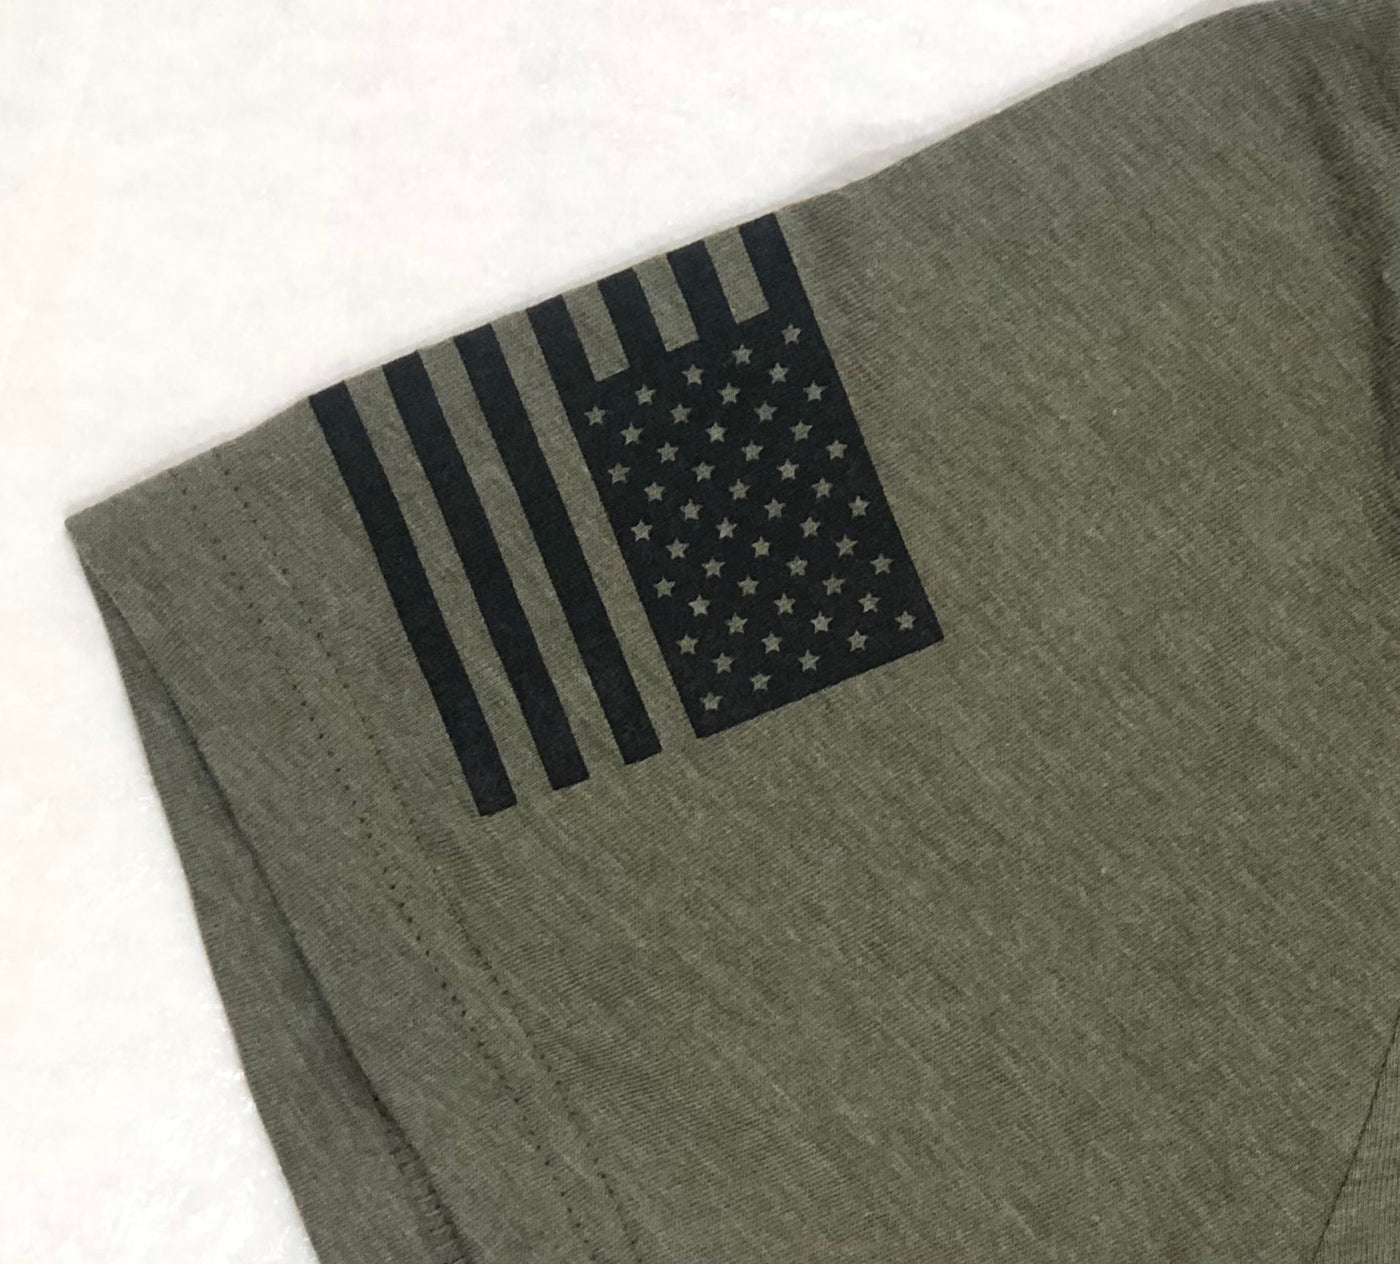 Cut-Off: Army Green Double Flags, Double Sleeves Retro Logo Tee